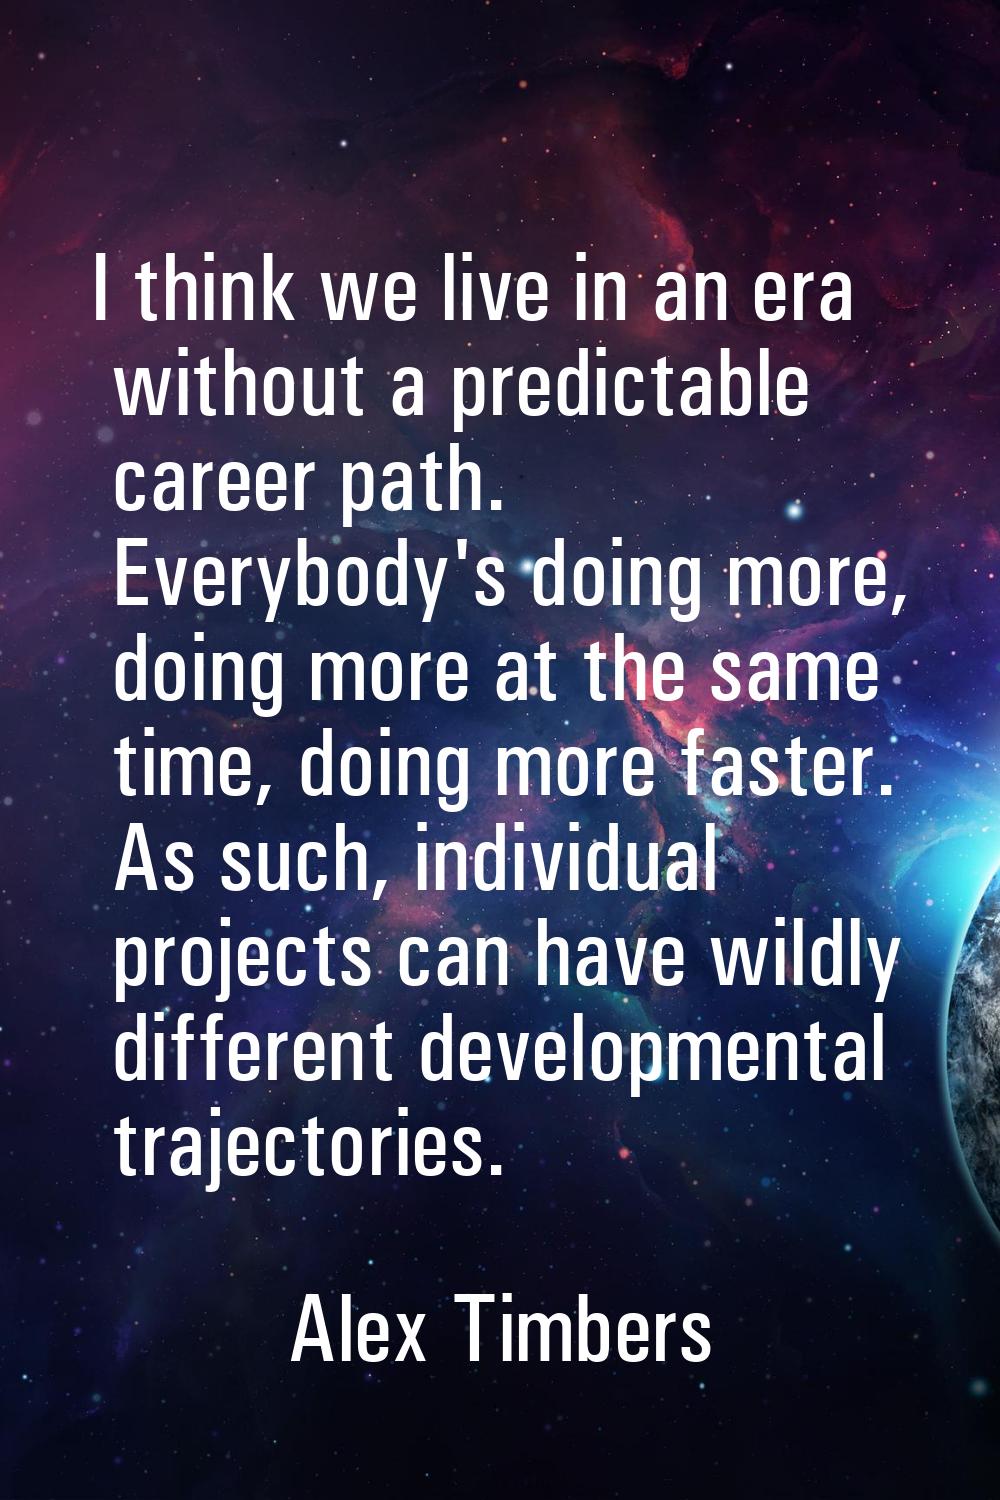 I think we live in an era without a predictable career path. Everybody's doing more, doing more at 